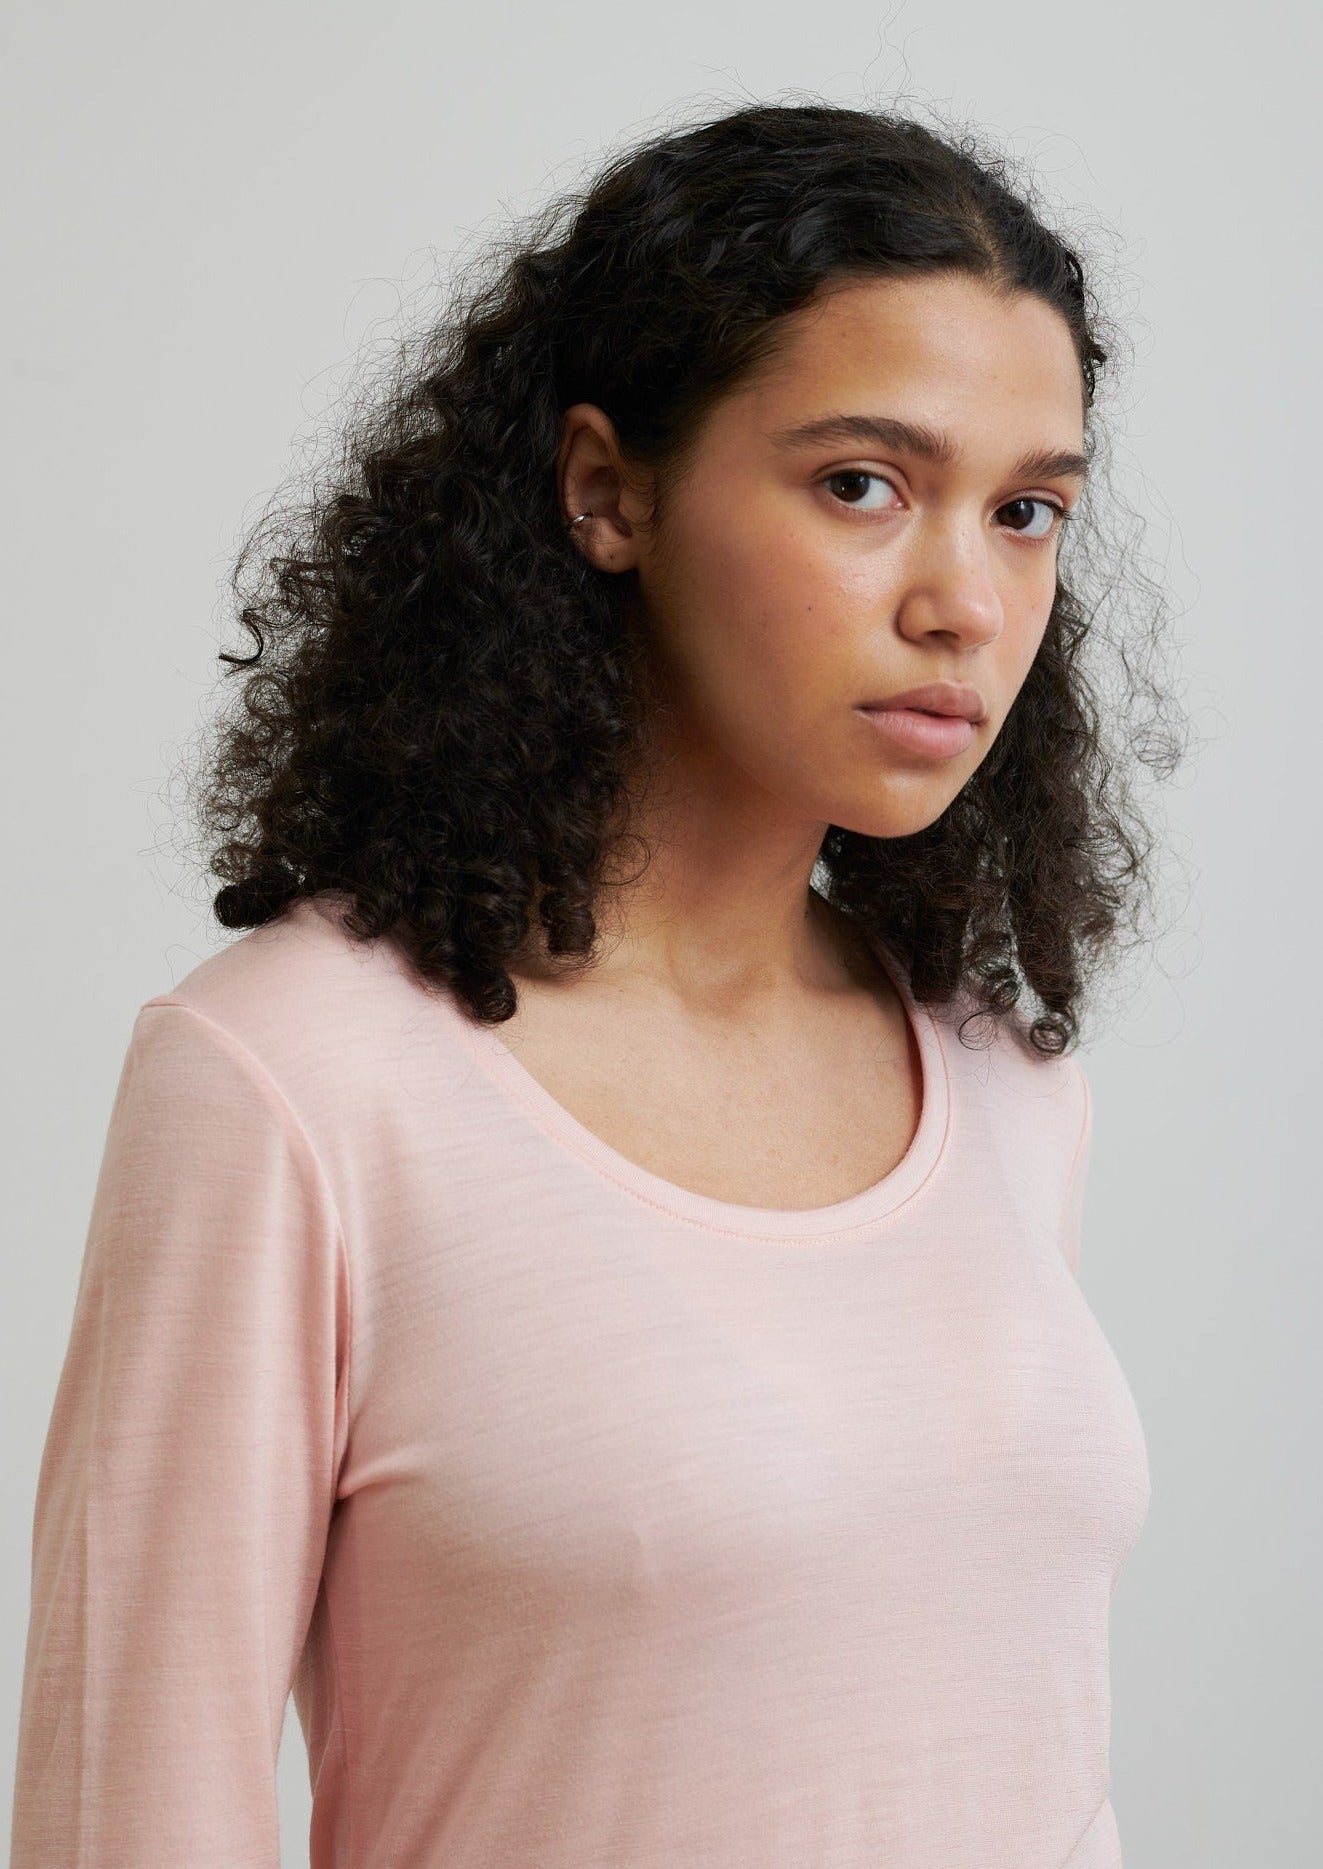 Detailed with a scoop neckline, this layering essential is soft and breathable to wear all seasons. Made from our lightweight merino wool from New Zealand.